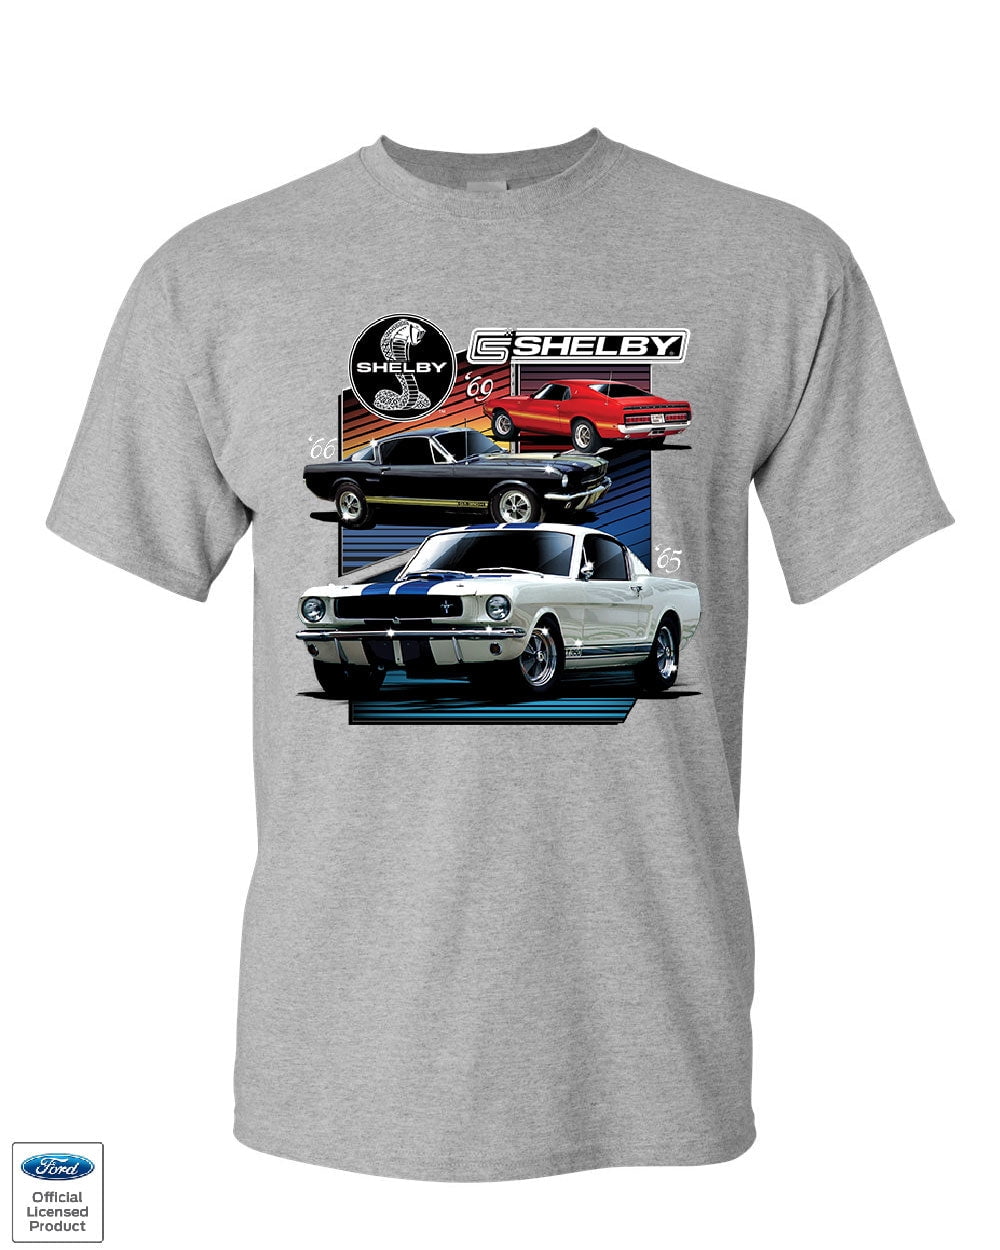 Tee Hunt Ford Mustang Shelby GT350 GT500 T-Shirt American Muscle Cars ...